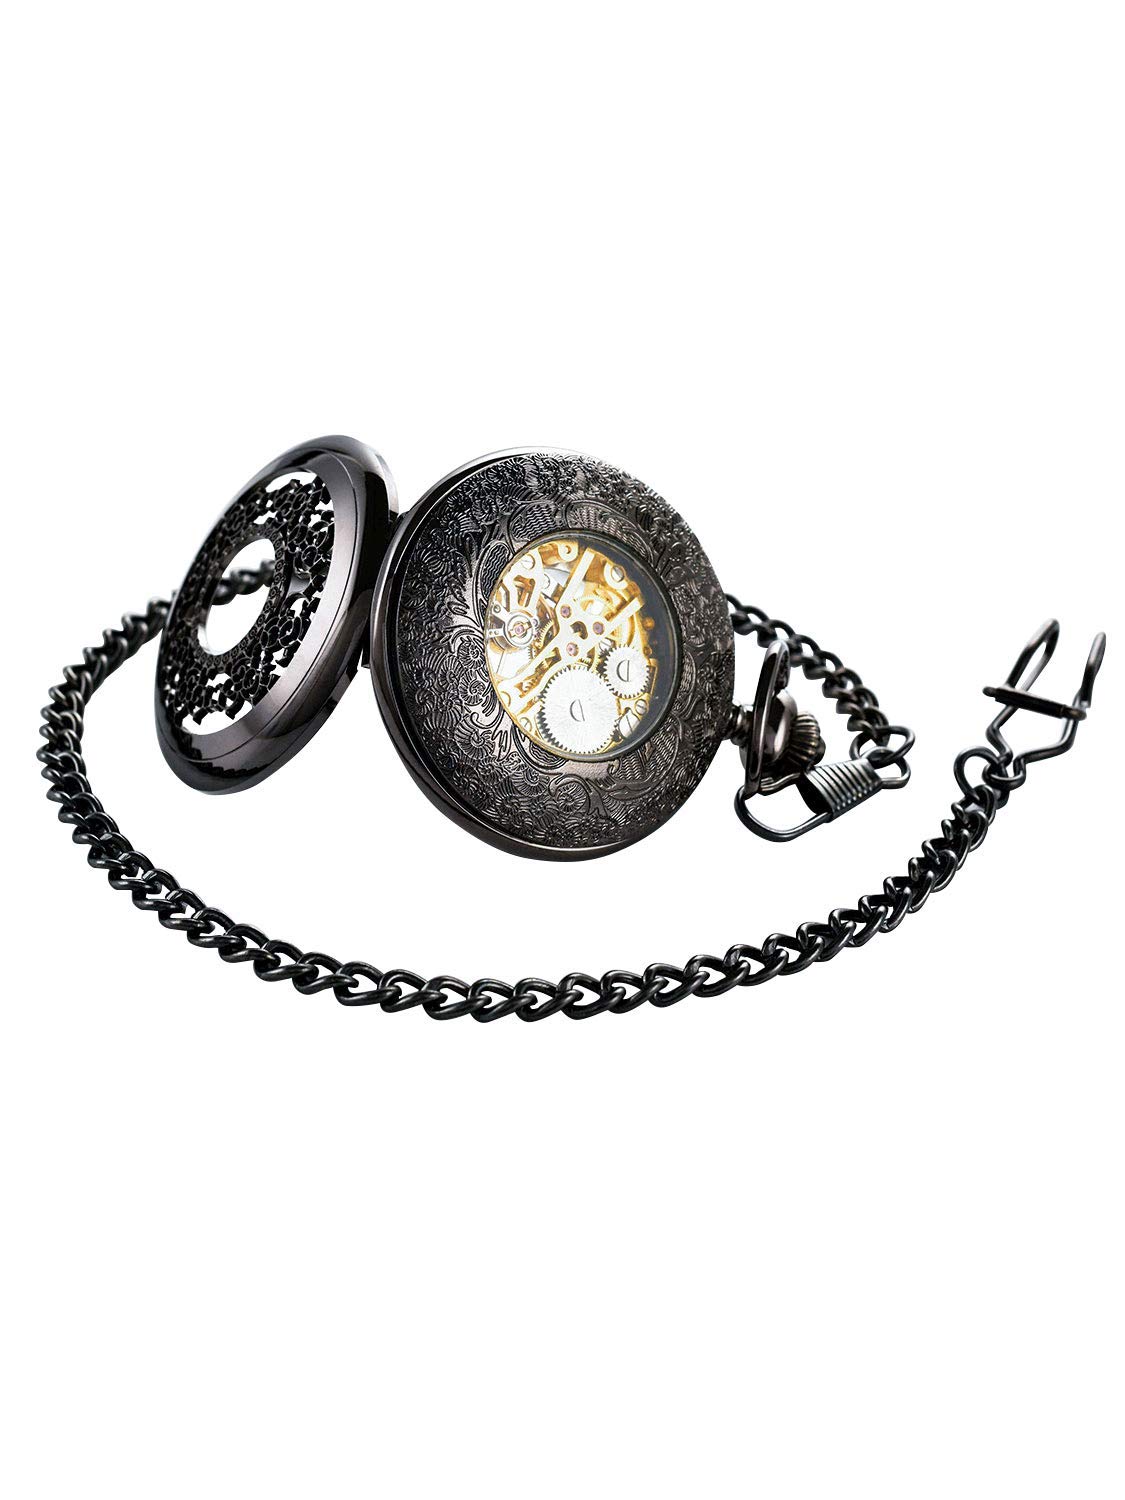 BOSHIYA Mechanical Pocket Watch Luminous Steampunk Vintage Pocket Watch/with Chains/Hand Wind Up/Black Skeleton/Dial Roman Numberals